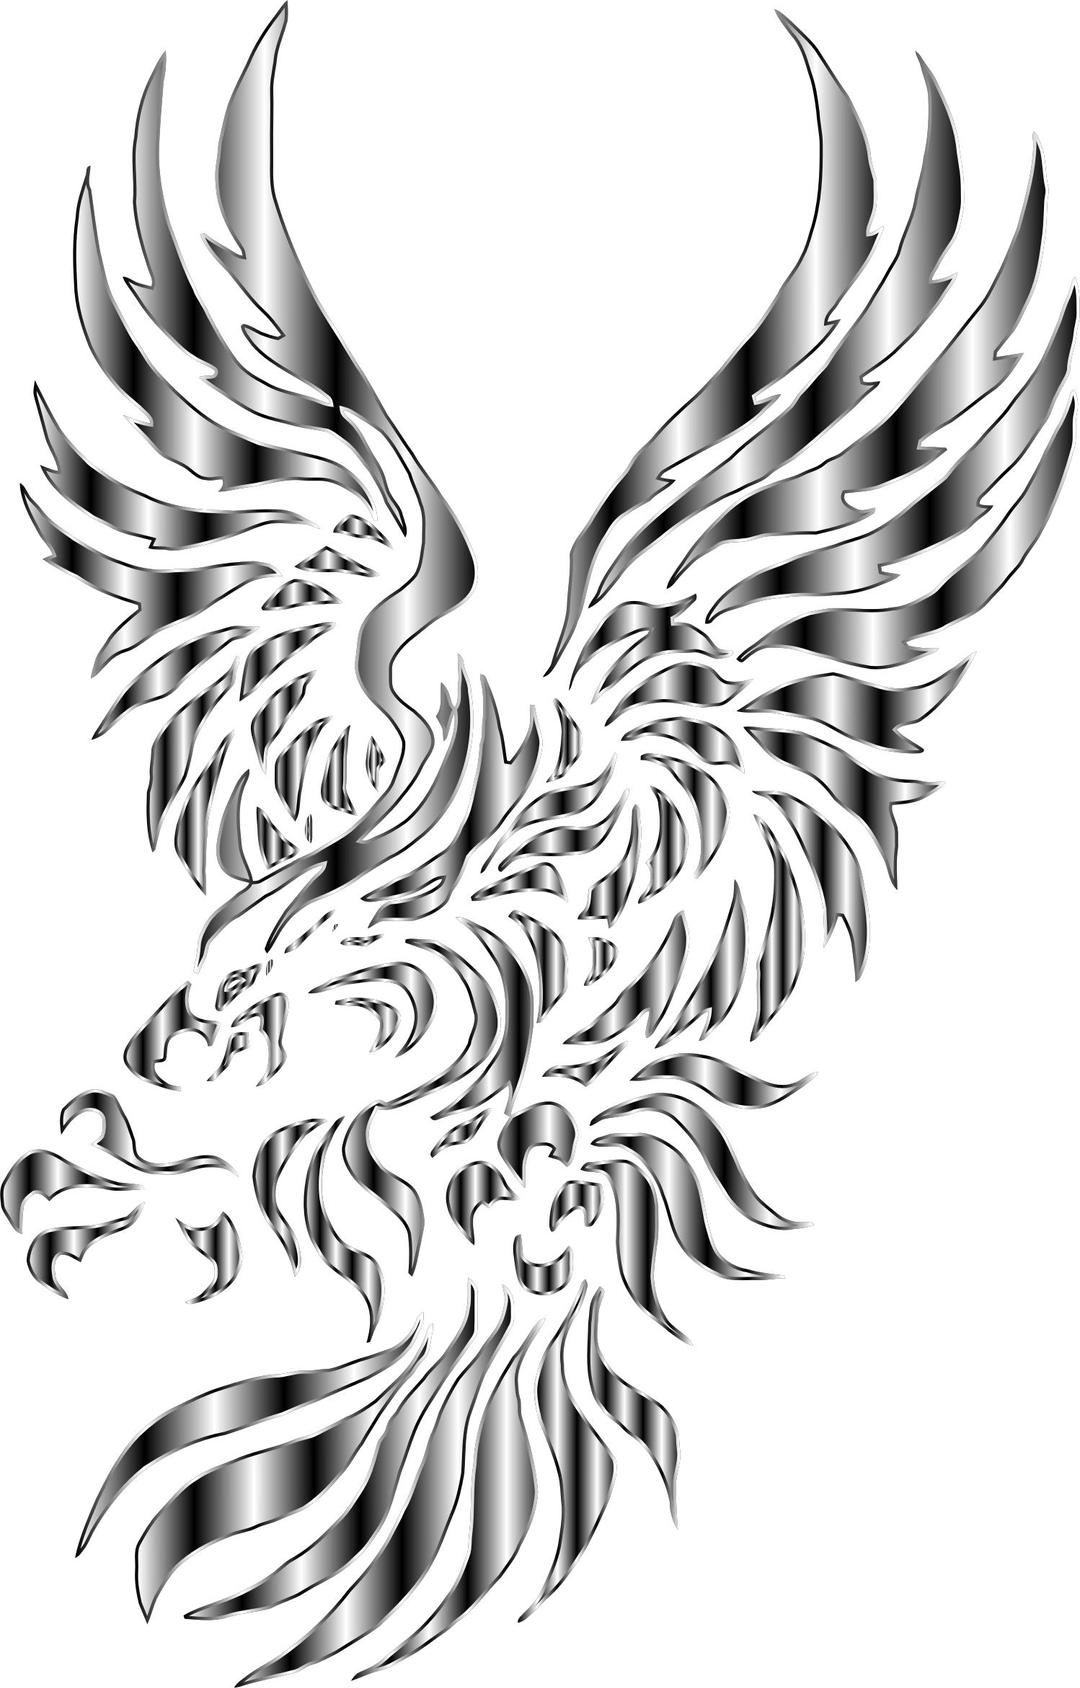 Chromatic Tribal Eagle 2 8 No Background png transparent